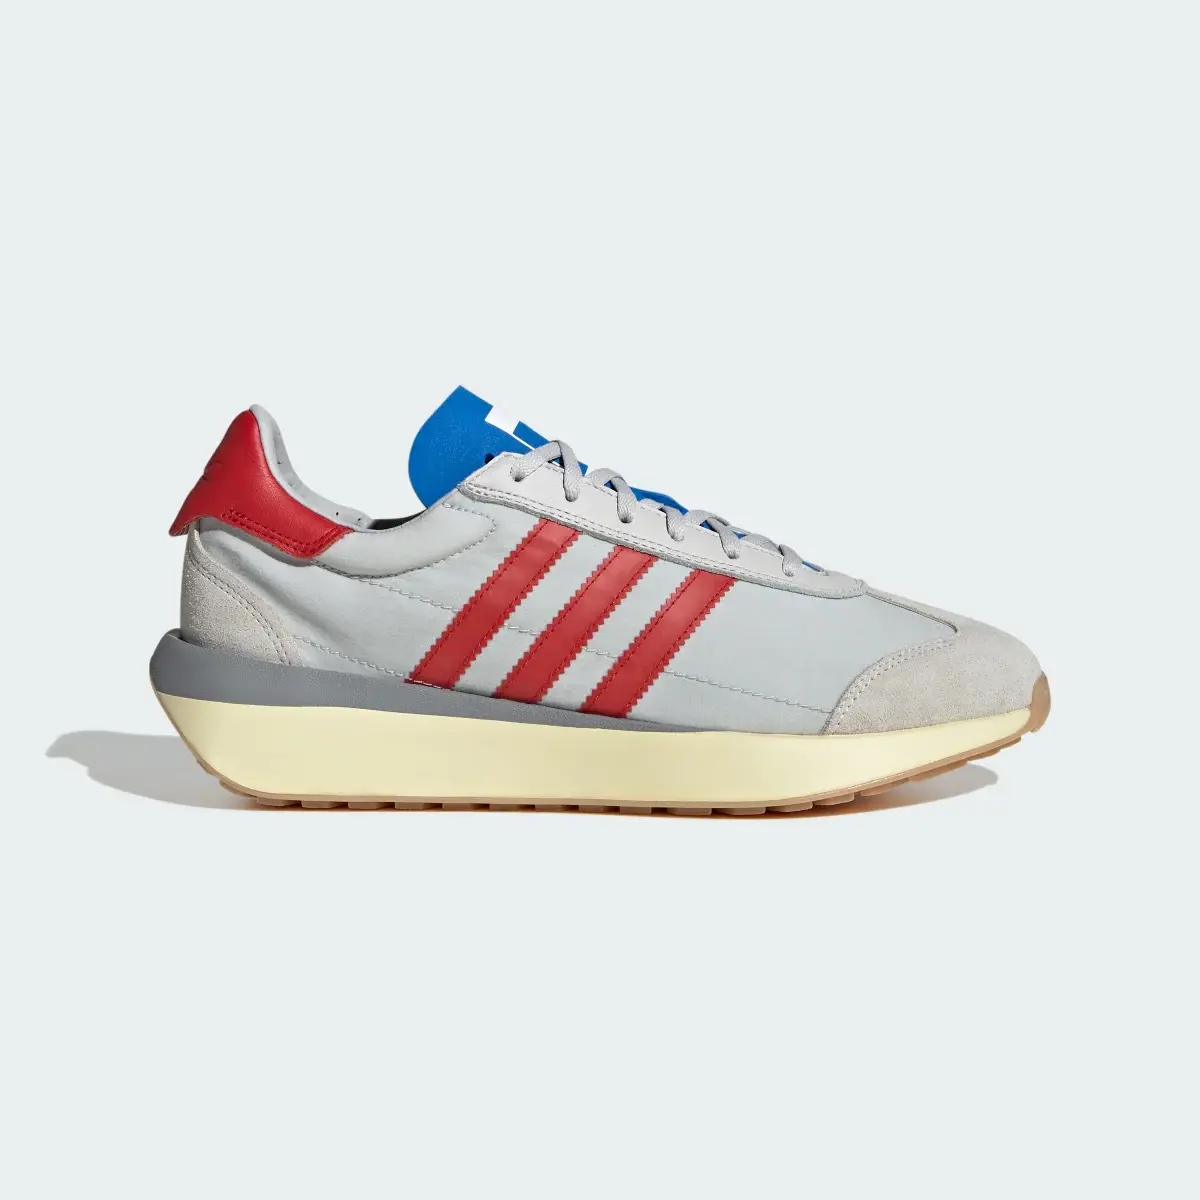 Adidas Sapatilhas Country XLG. 2